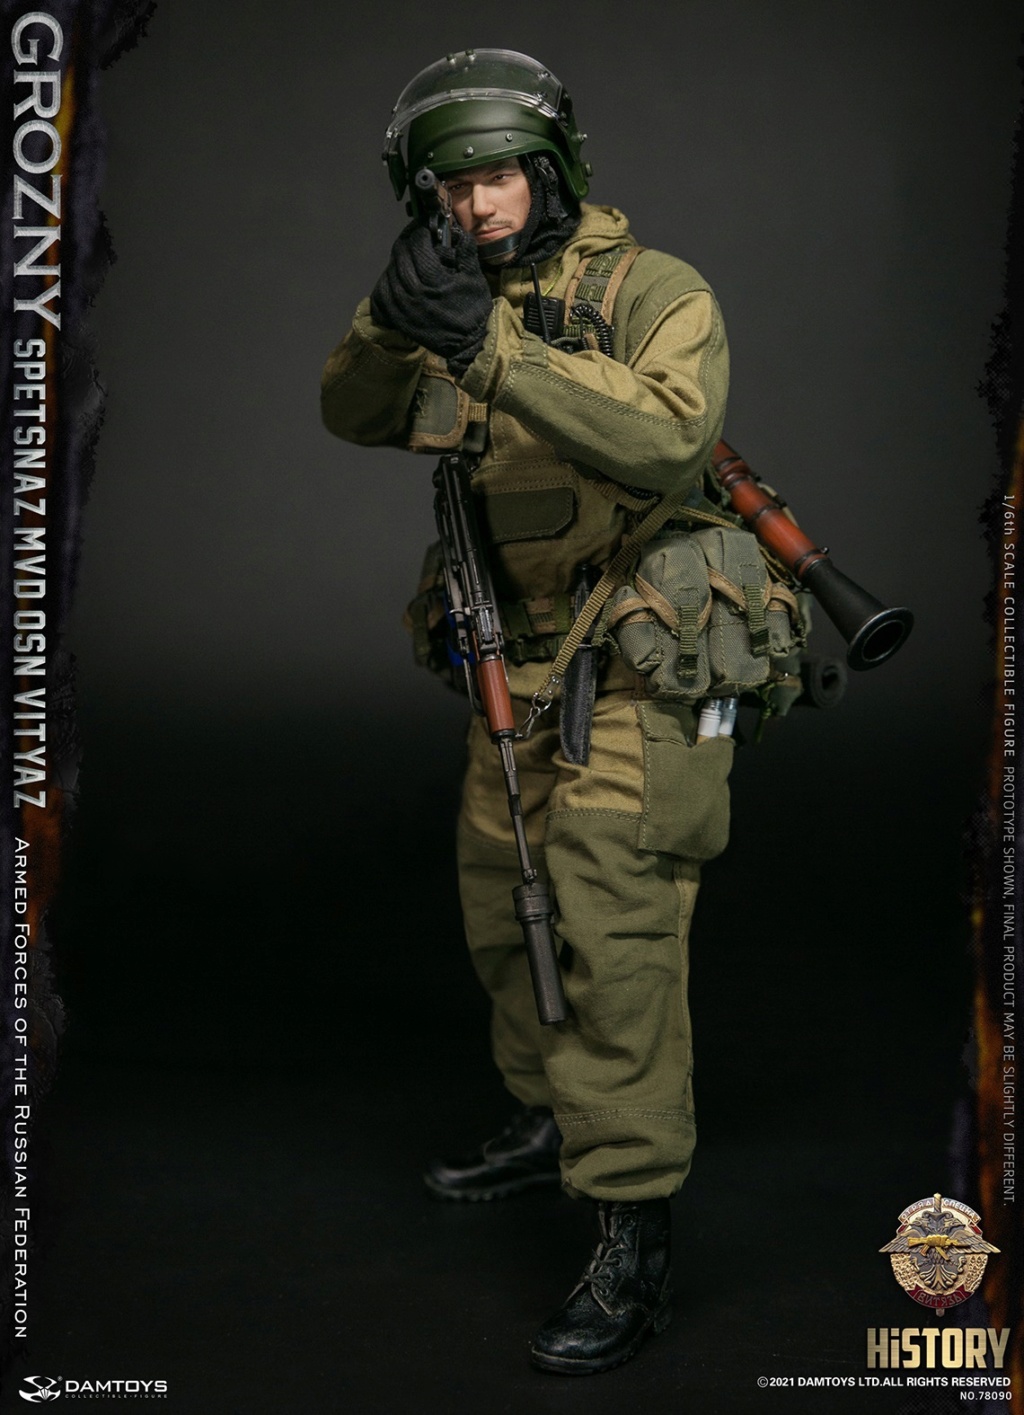 modernmilitary - NEW PRODUCT: DAMTOYS: 1/6 Russian In-Service Warrior Special Forces - Grozny s78090 13571710